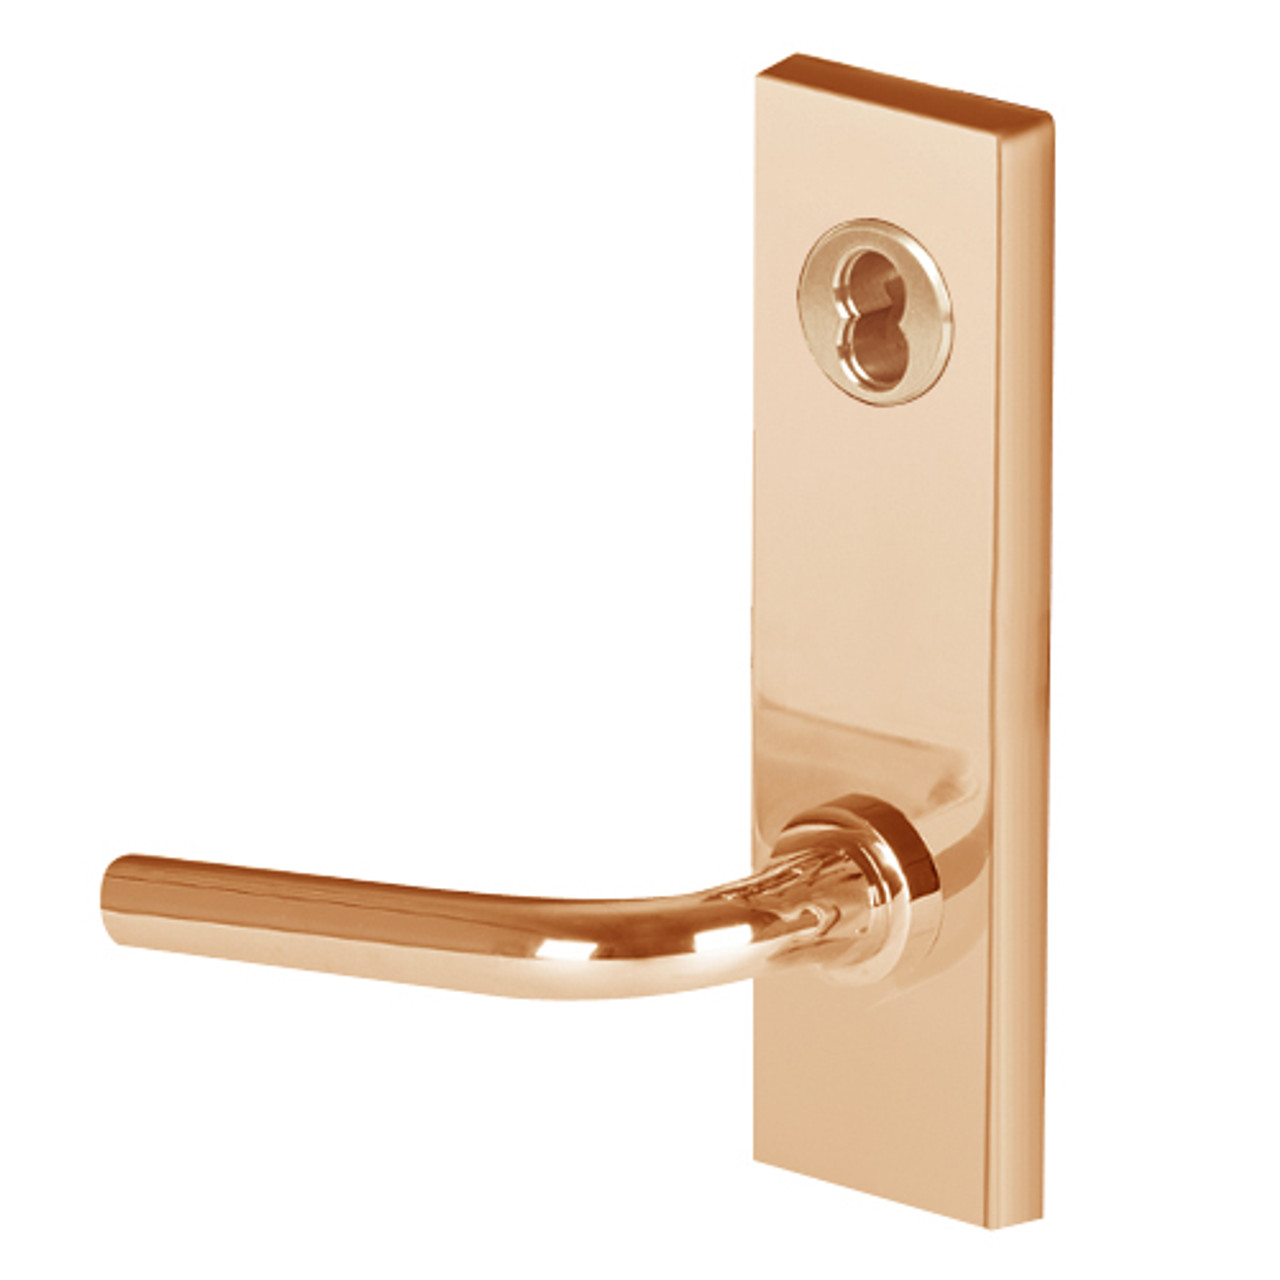 45H7G12M612 Best 40H Series Communicating with Deadbolt Heavy Duty Mortise Lever Lock with Solid Tube with No Return in Satin Bronze